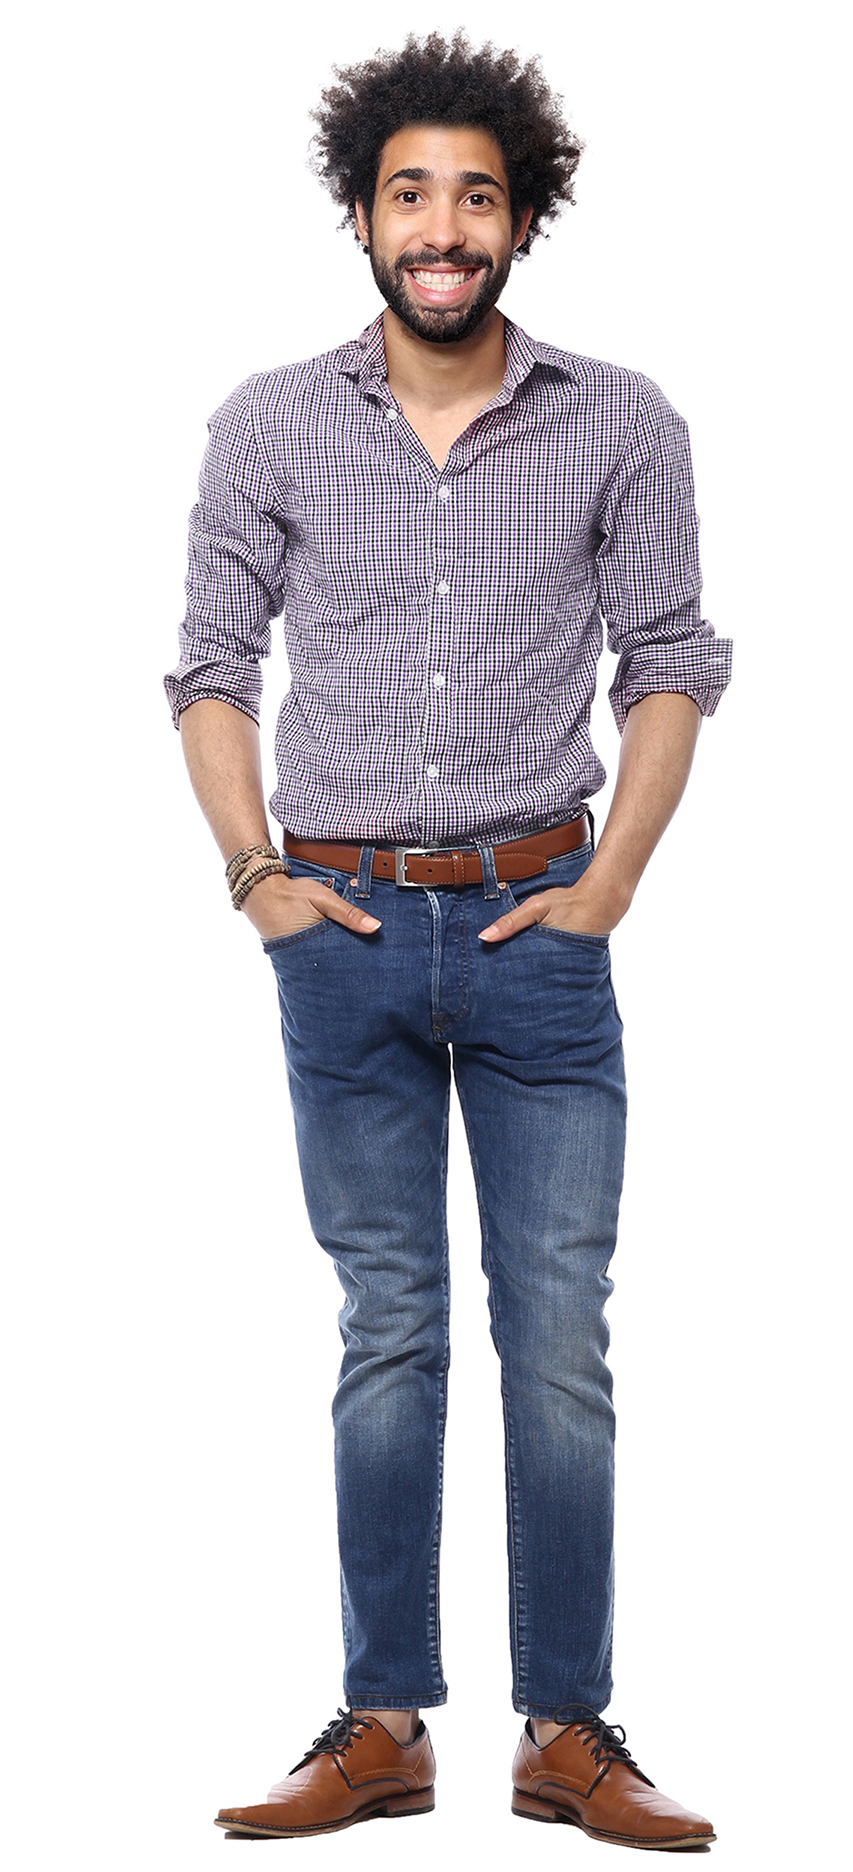 A man wearing a button-down, jeans, and oxfords stands confidently with his hands in his pockets.